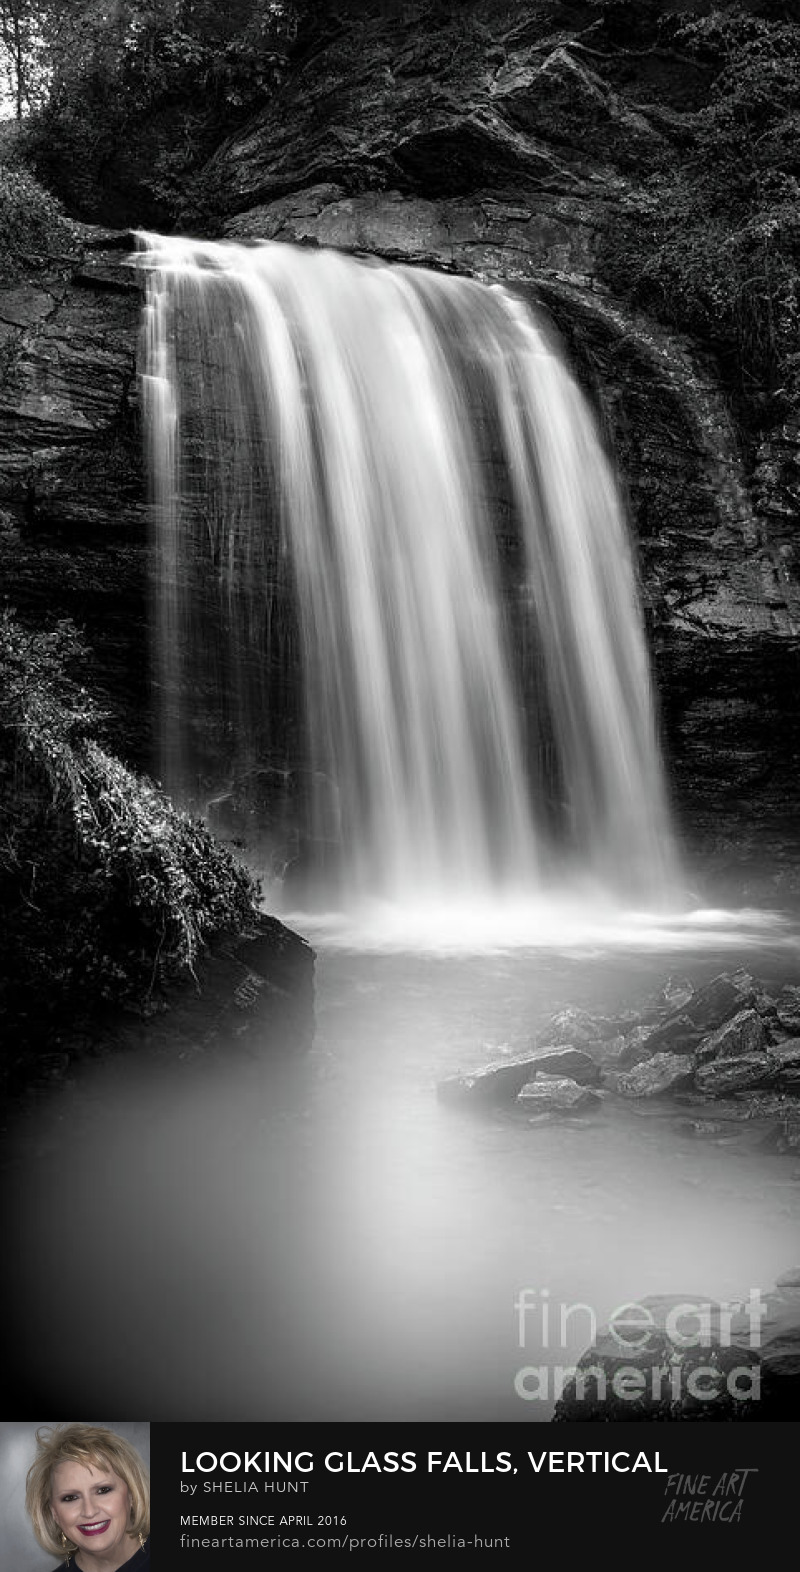 Looking Glass Falls vertical view by Shelia Hunt